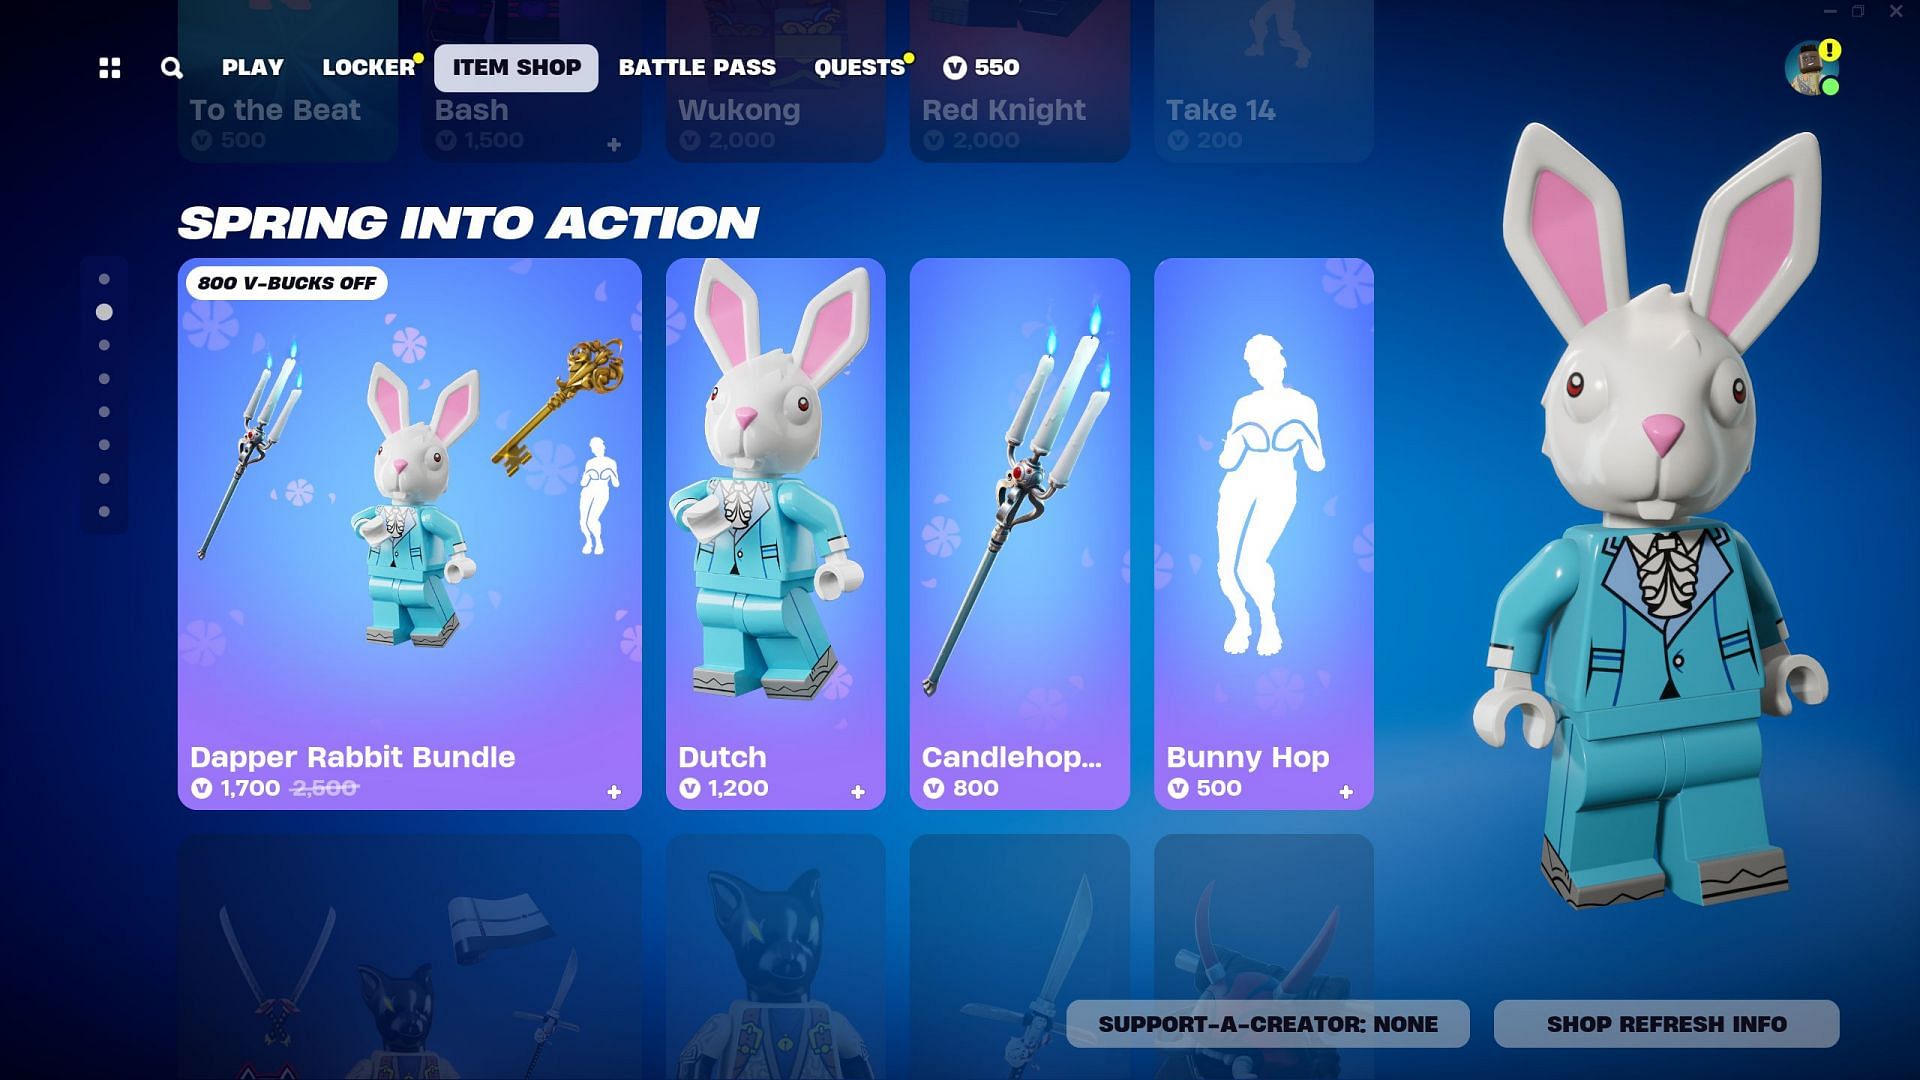 Dutch Skin is currently listed in the Item Shop (Image via Epic Games/Fortnite)